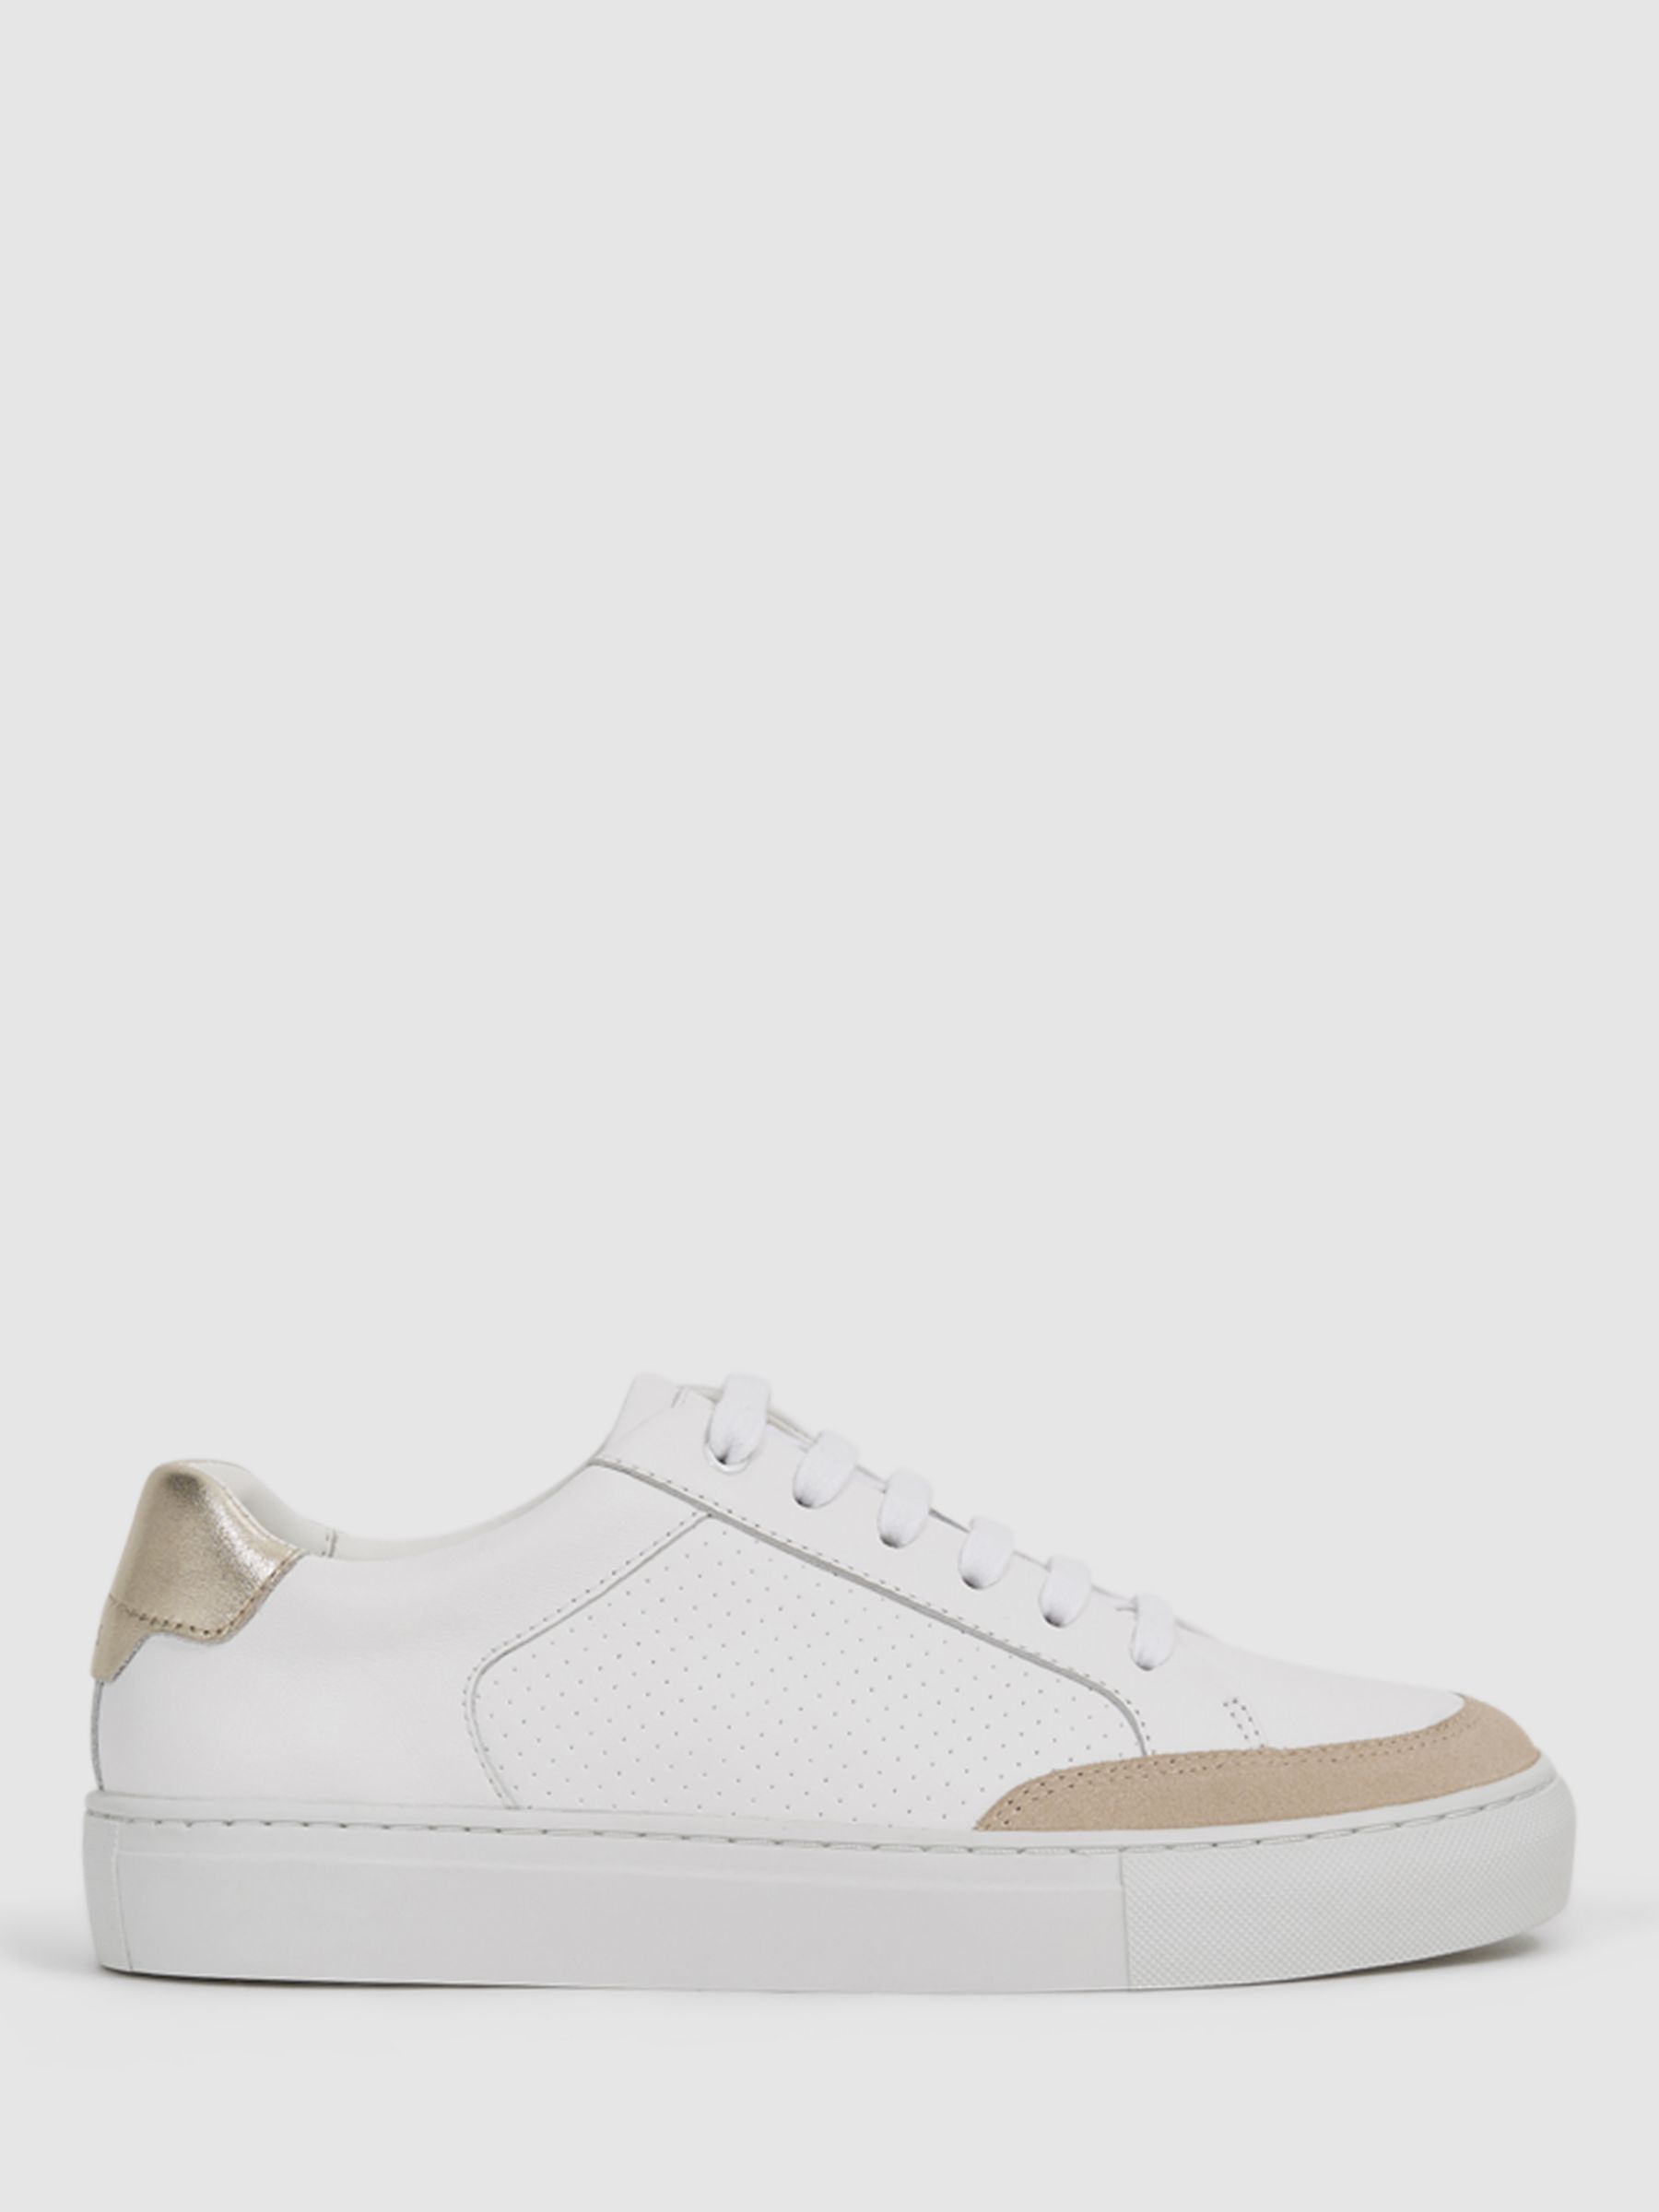 Reiss Ashley Leather and Suede Low Top Trainers, White/Gold